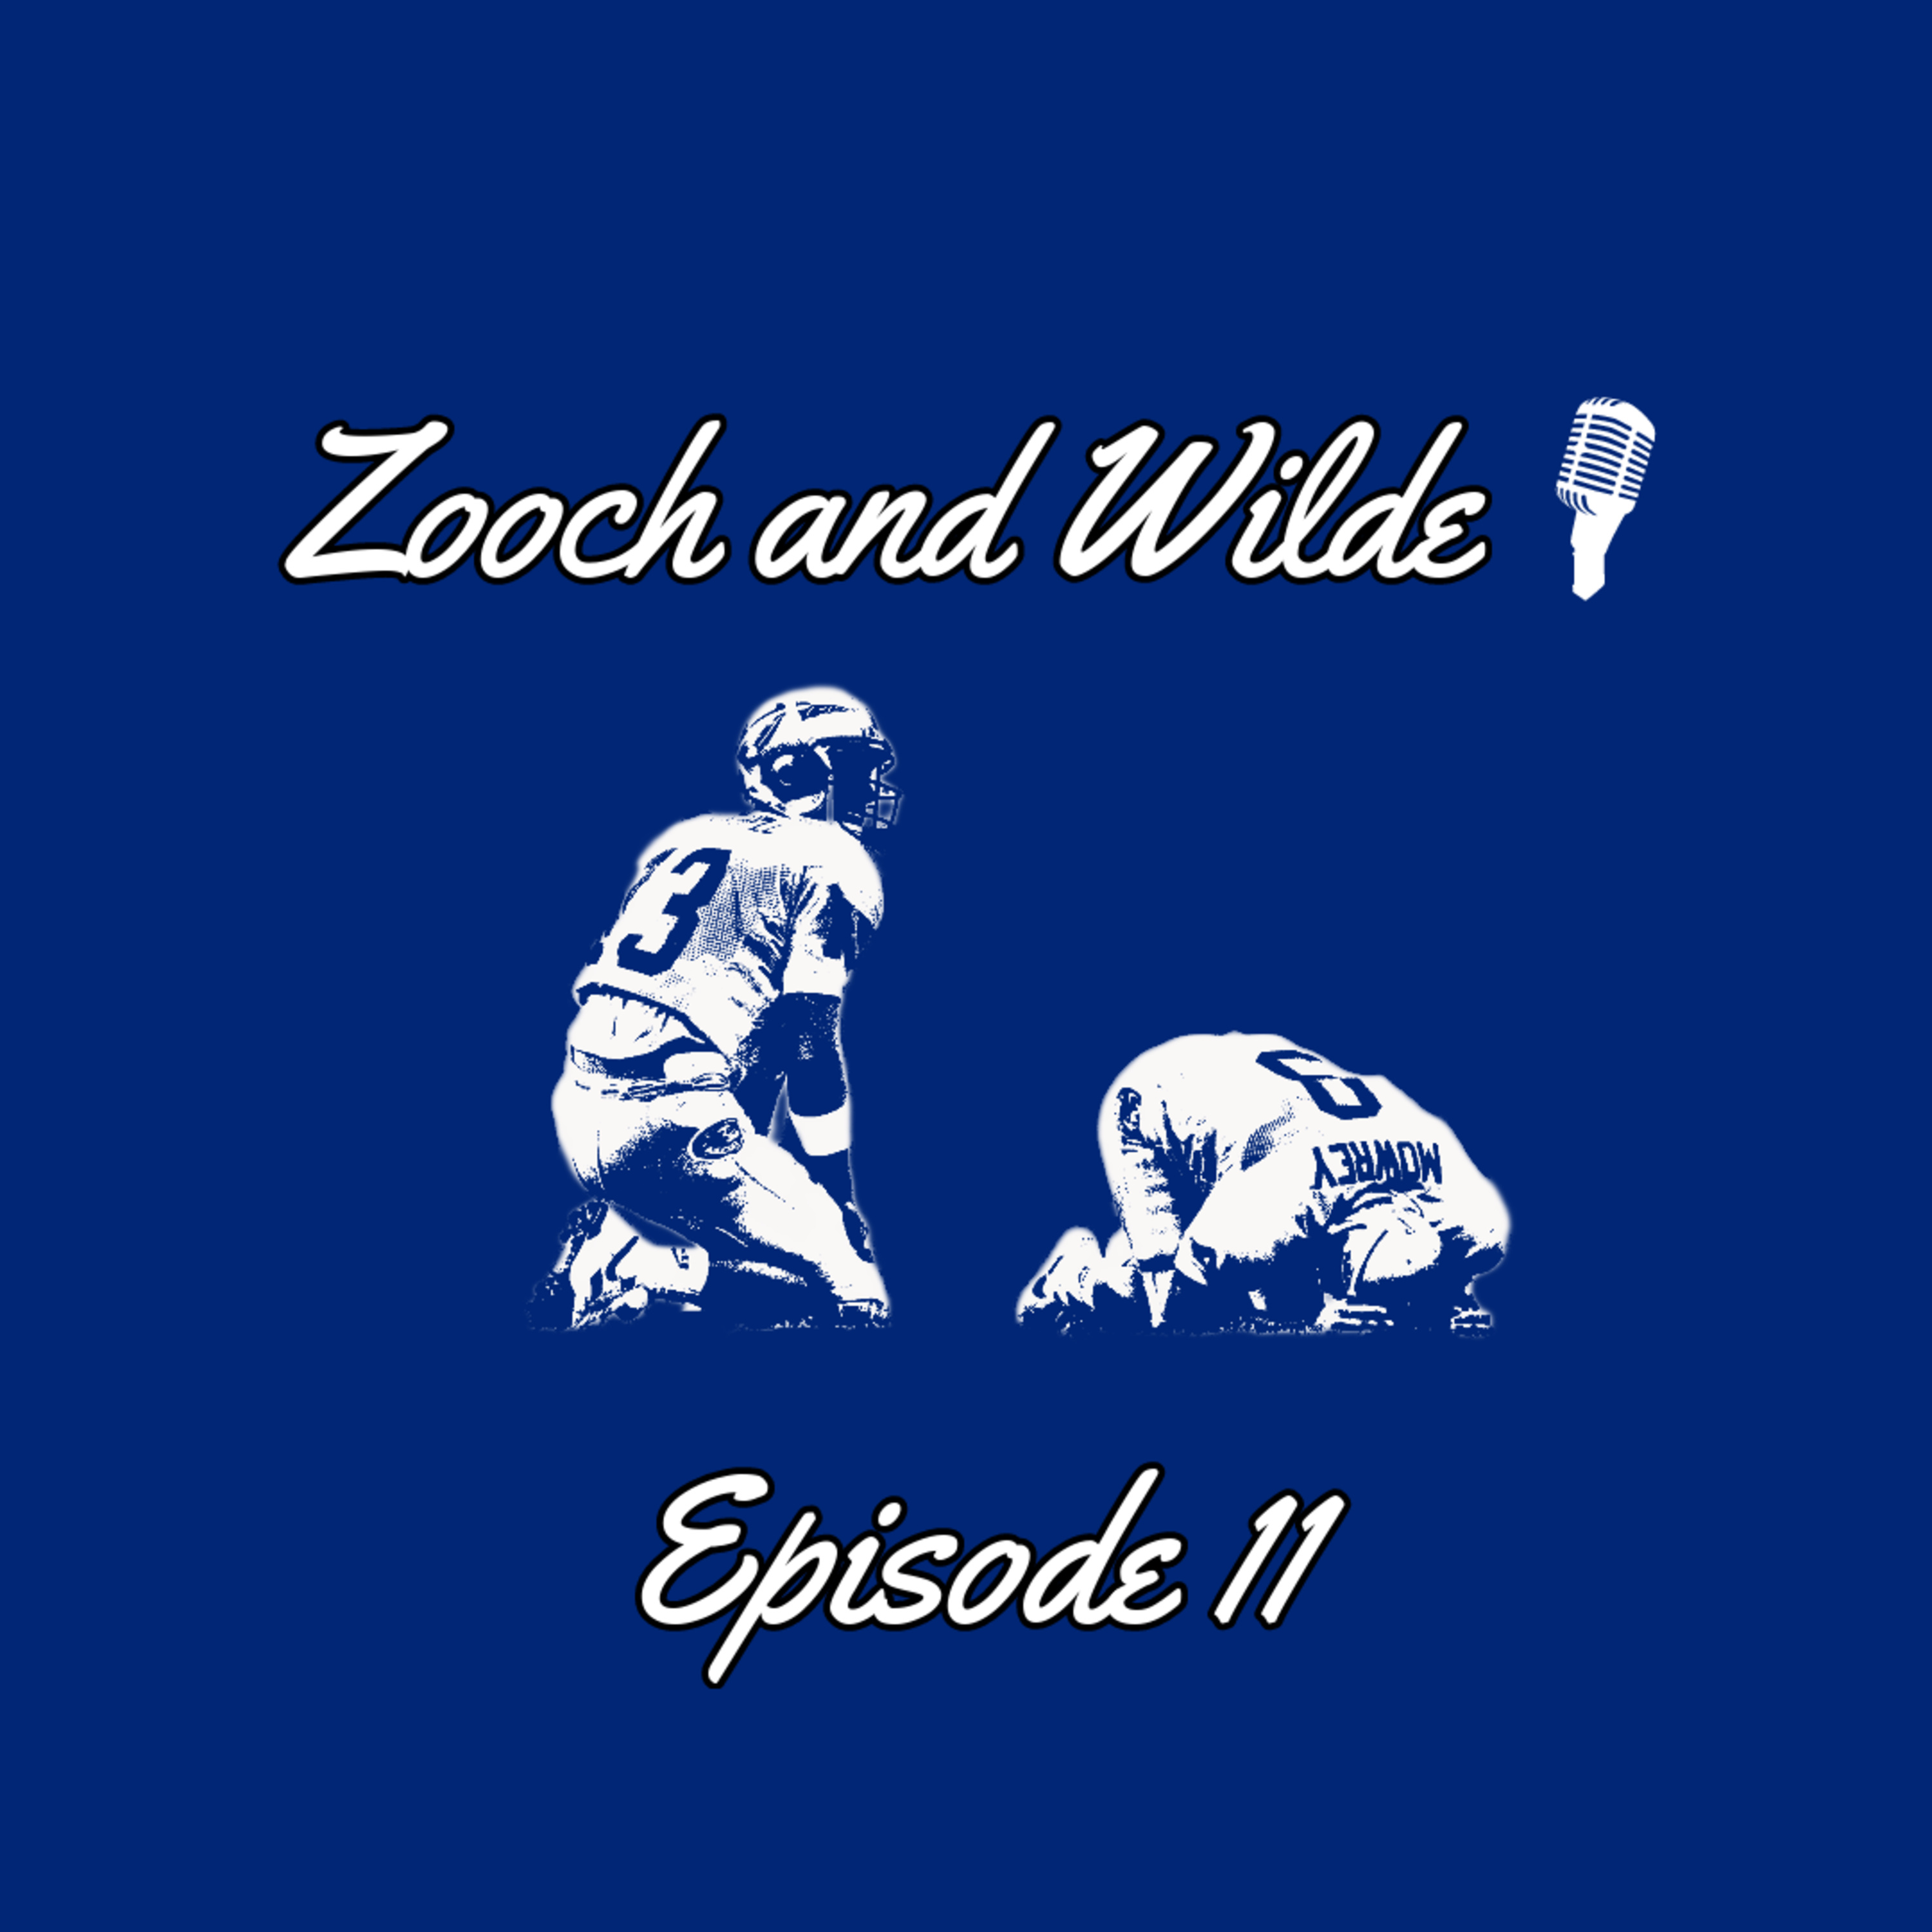 Zooch and Wilde Episode 11: The Connor Stallions Saga Continues